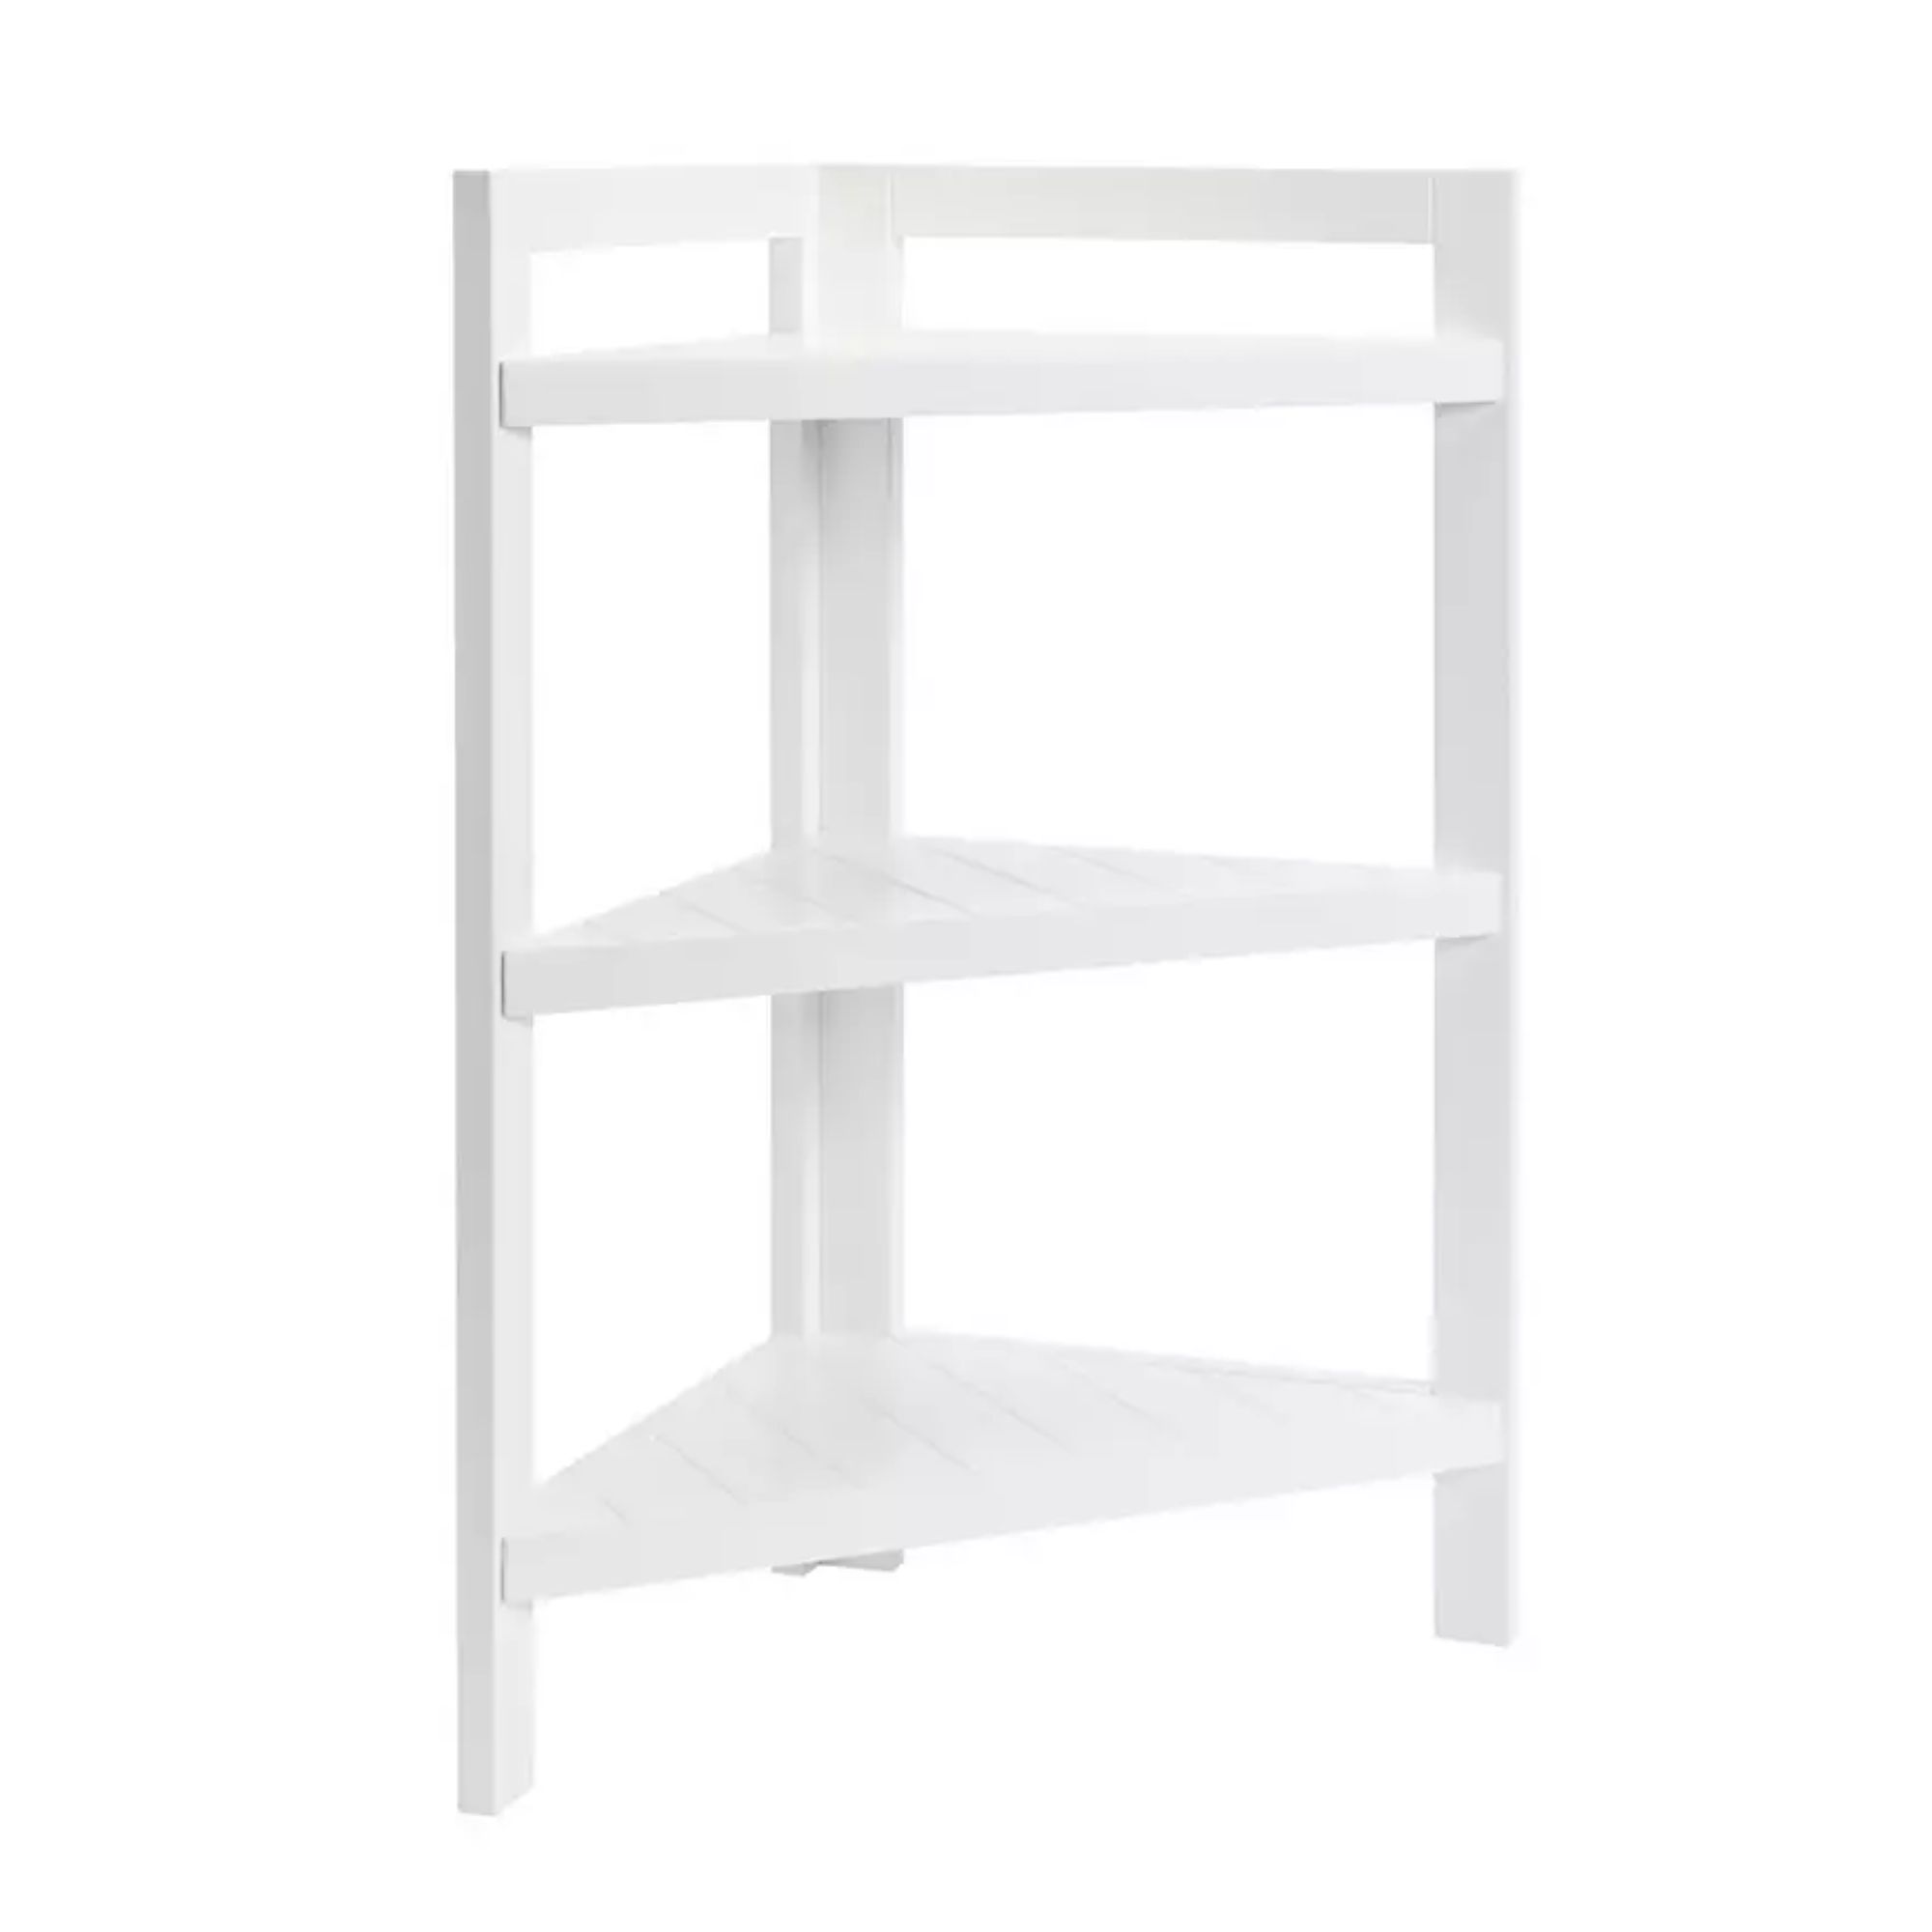 Argos Home Tongue And Groove Corner Unit - White